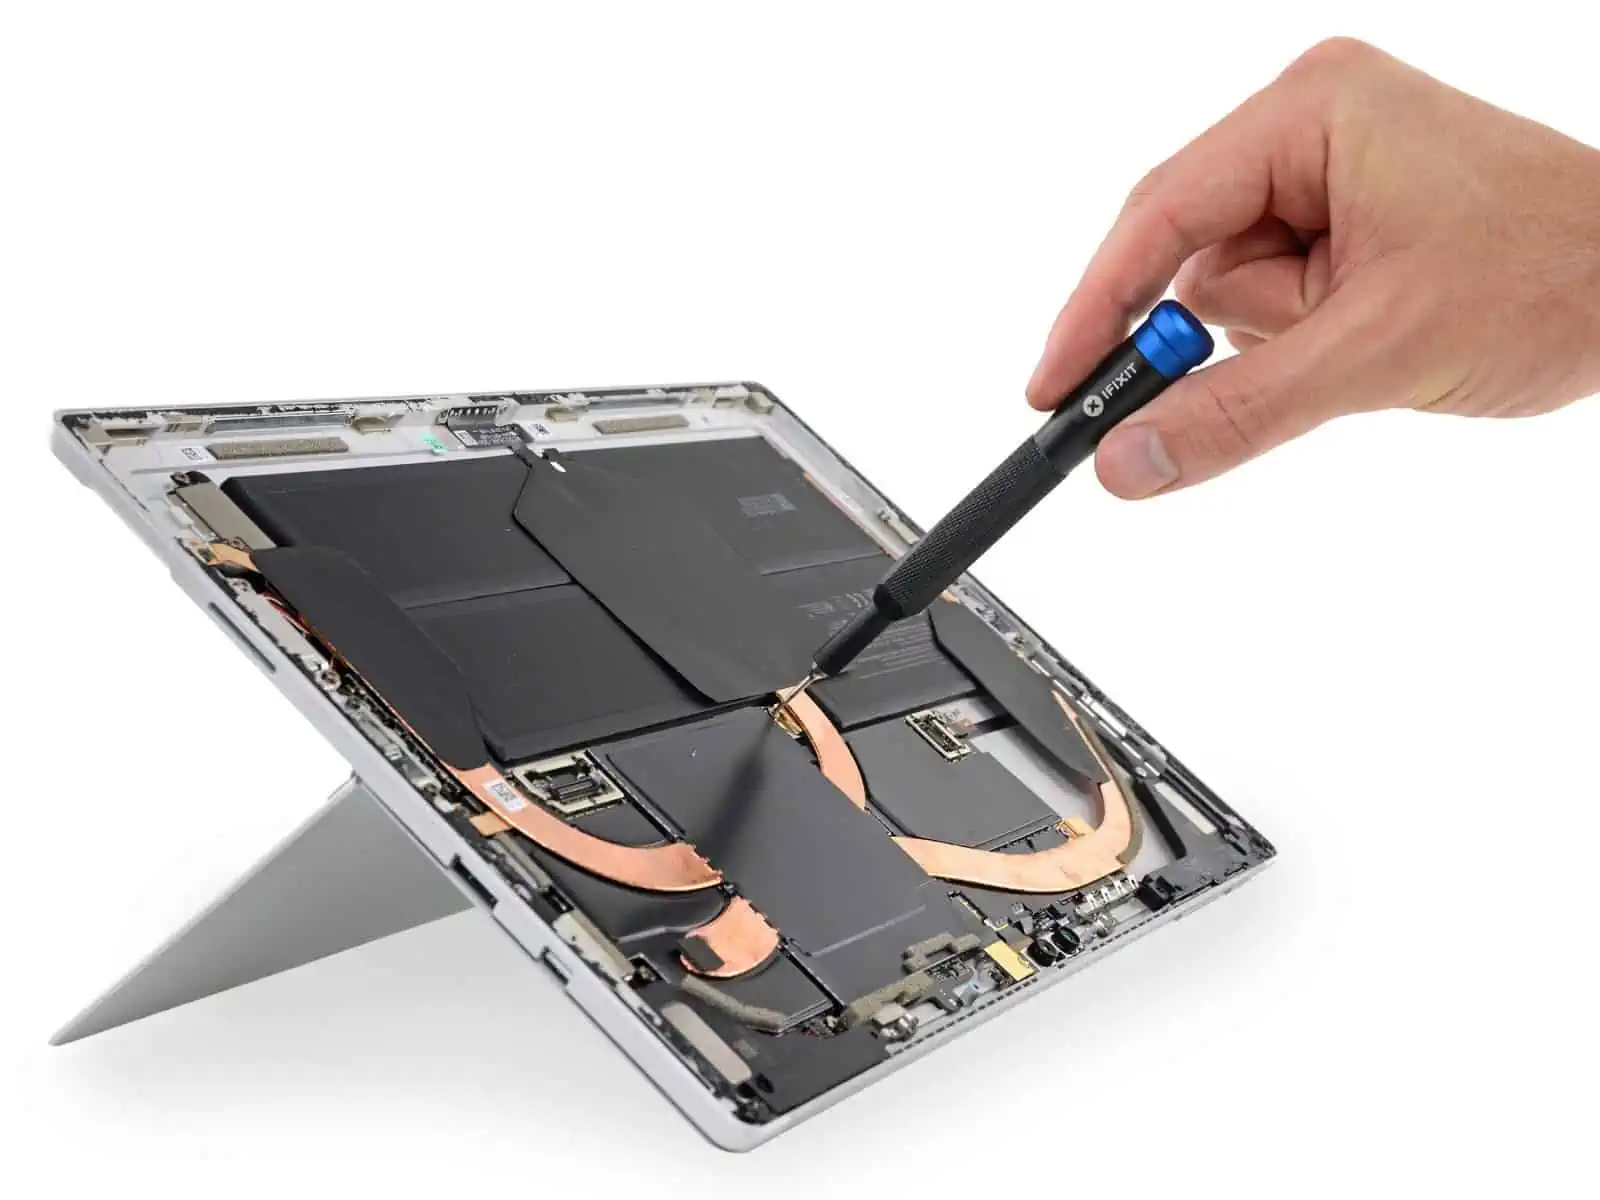 Yes, we do Repair Microsoft Surface Pro Cracked Screens for Much